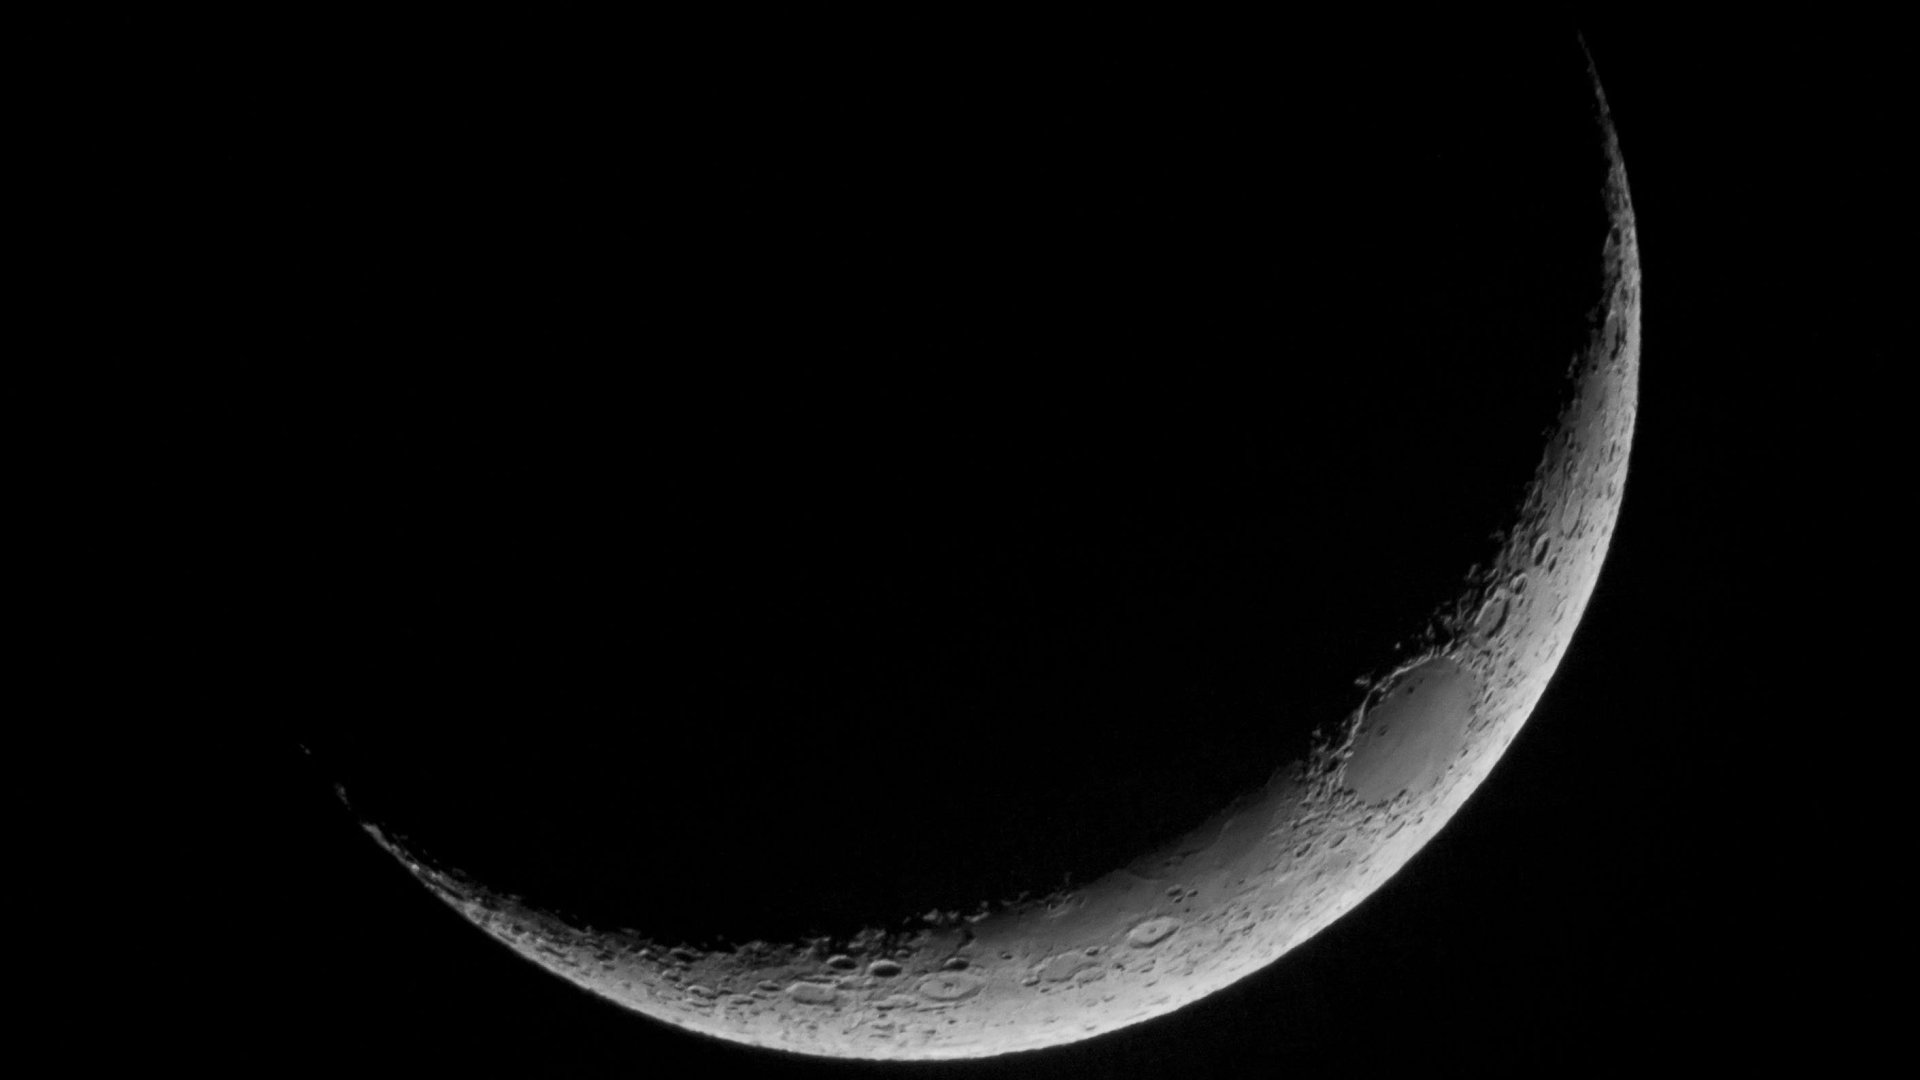 Crescent Moon Wallpaper 4005 Hd Wallpapers in Space   Imagescicom